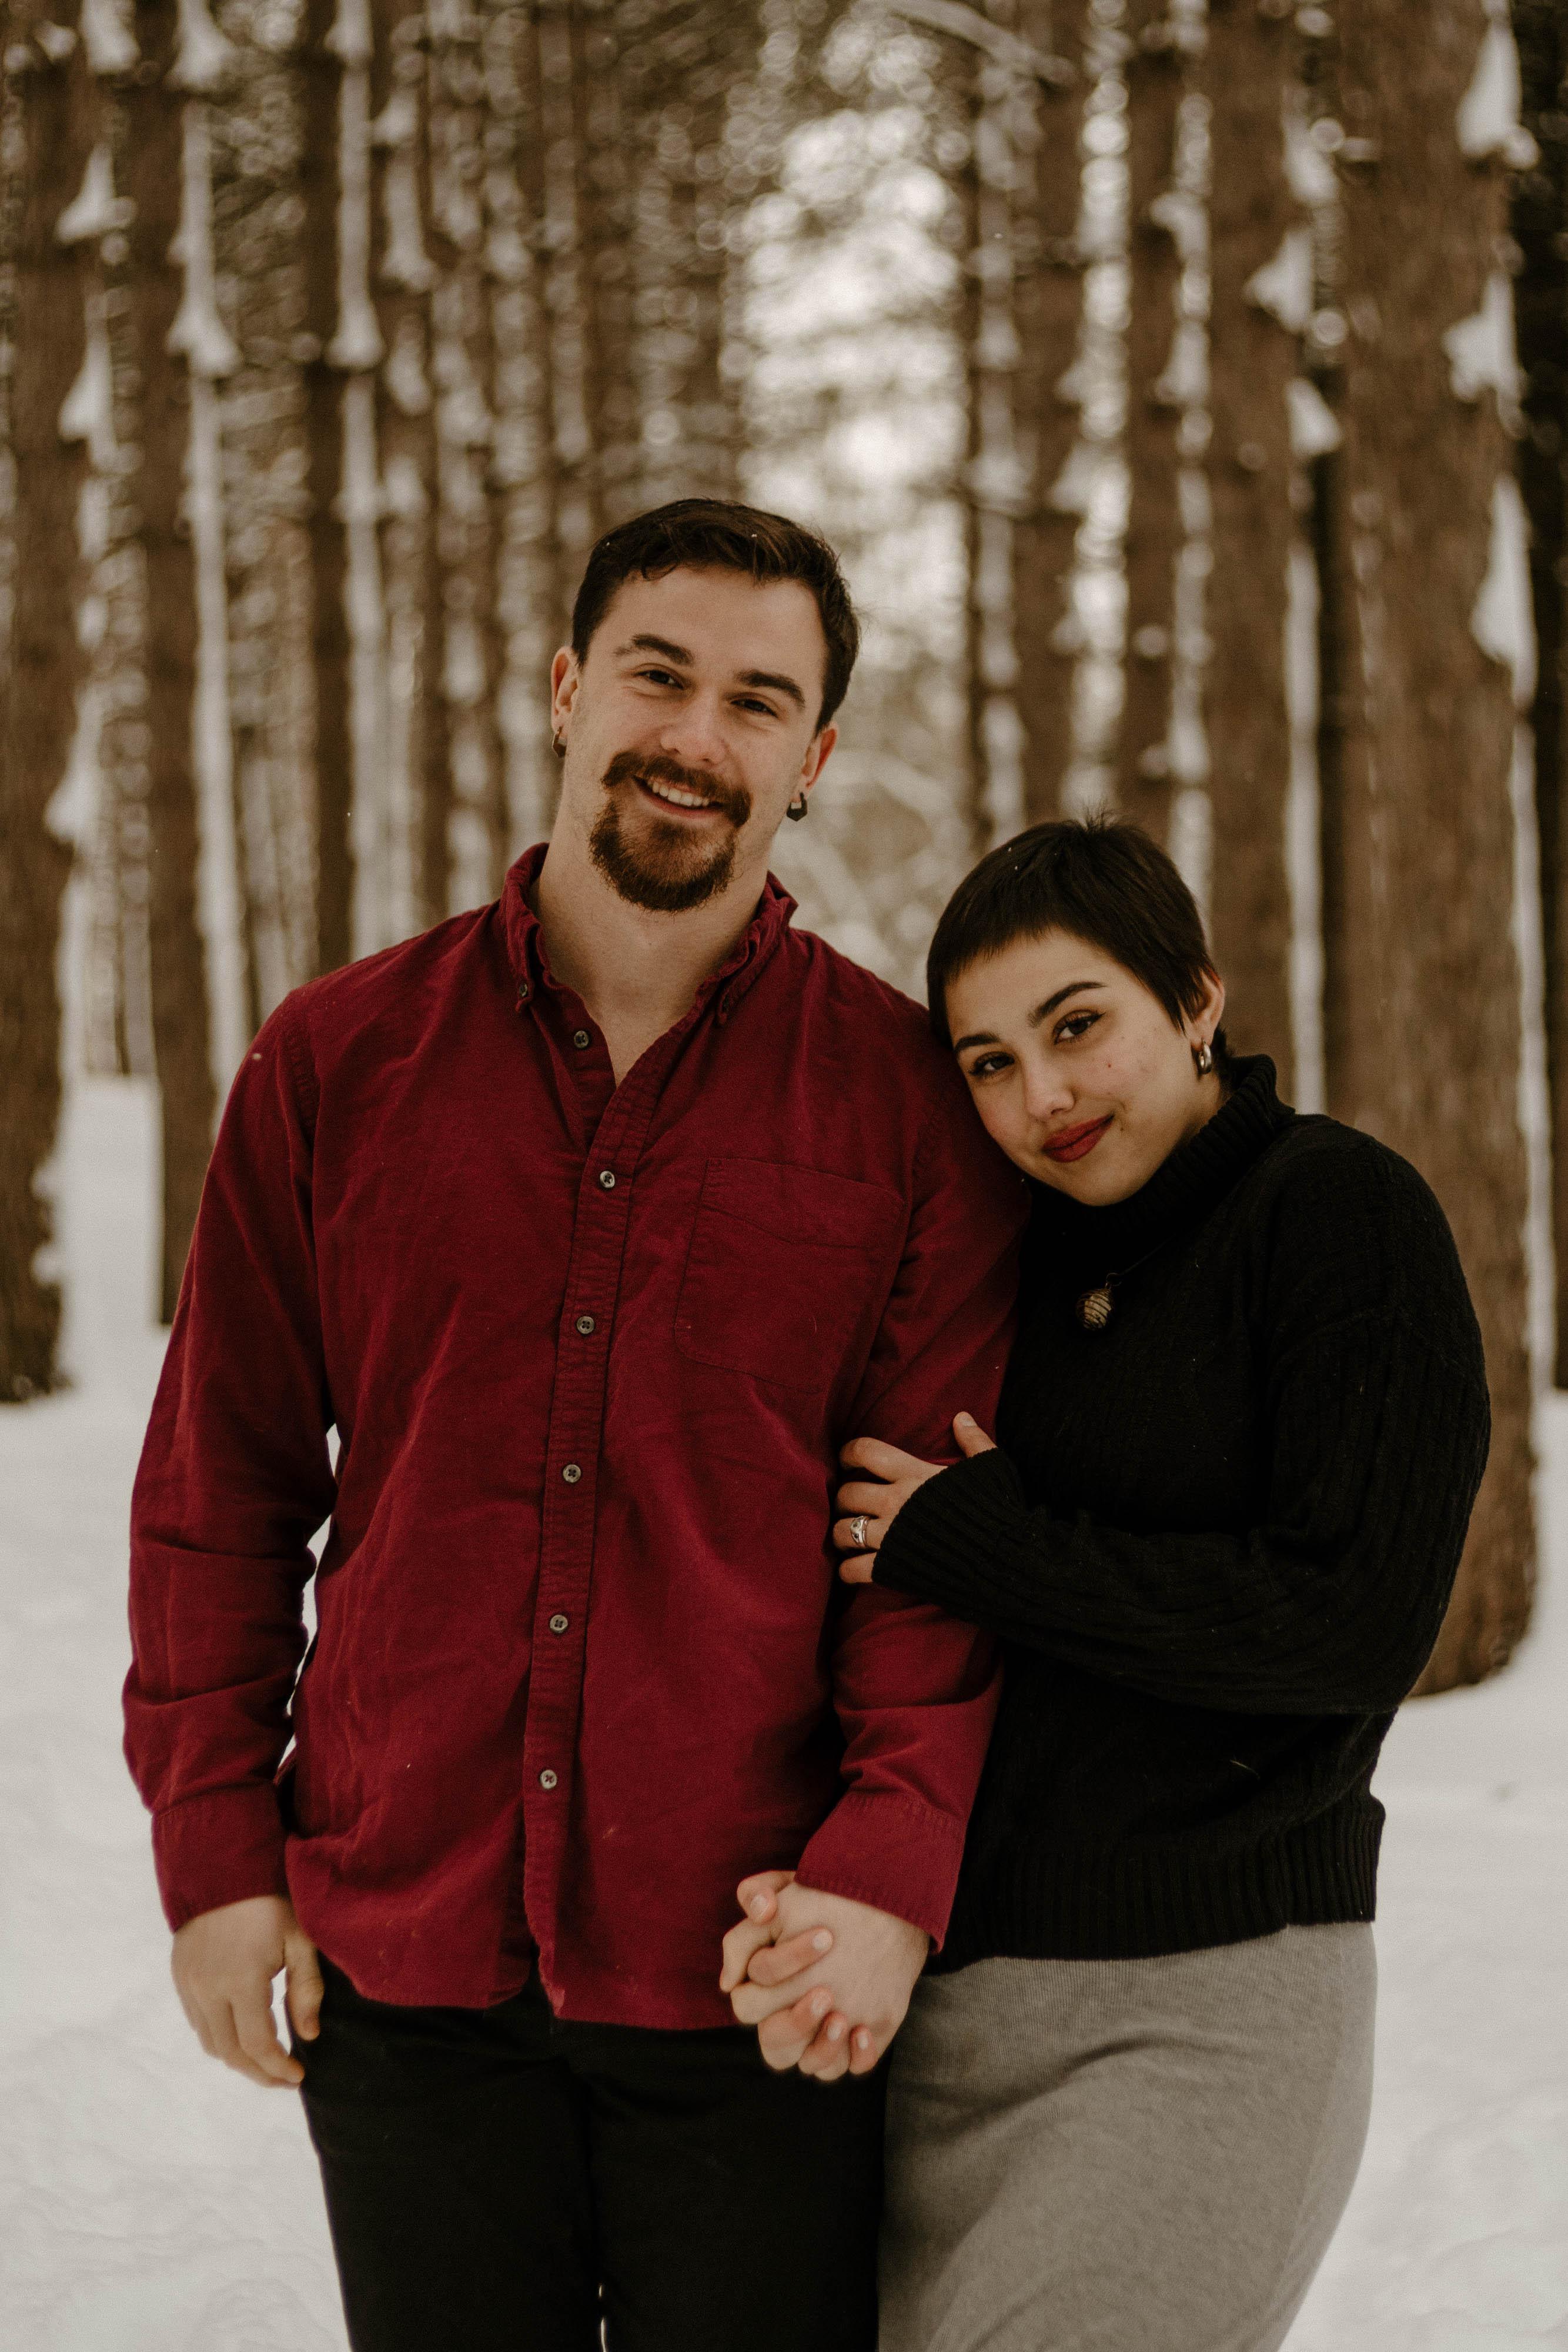 The Wedding Website of Noelle Nicoara and Sam Patterson